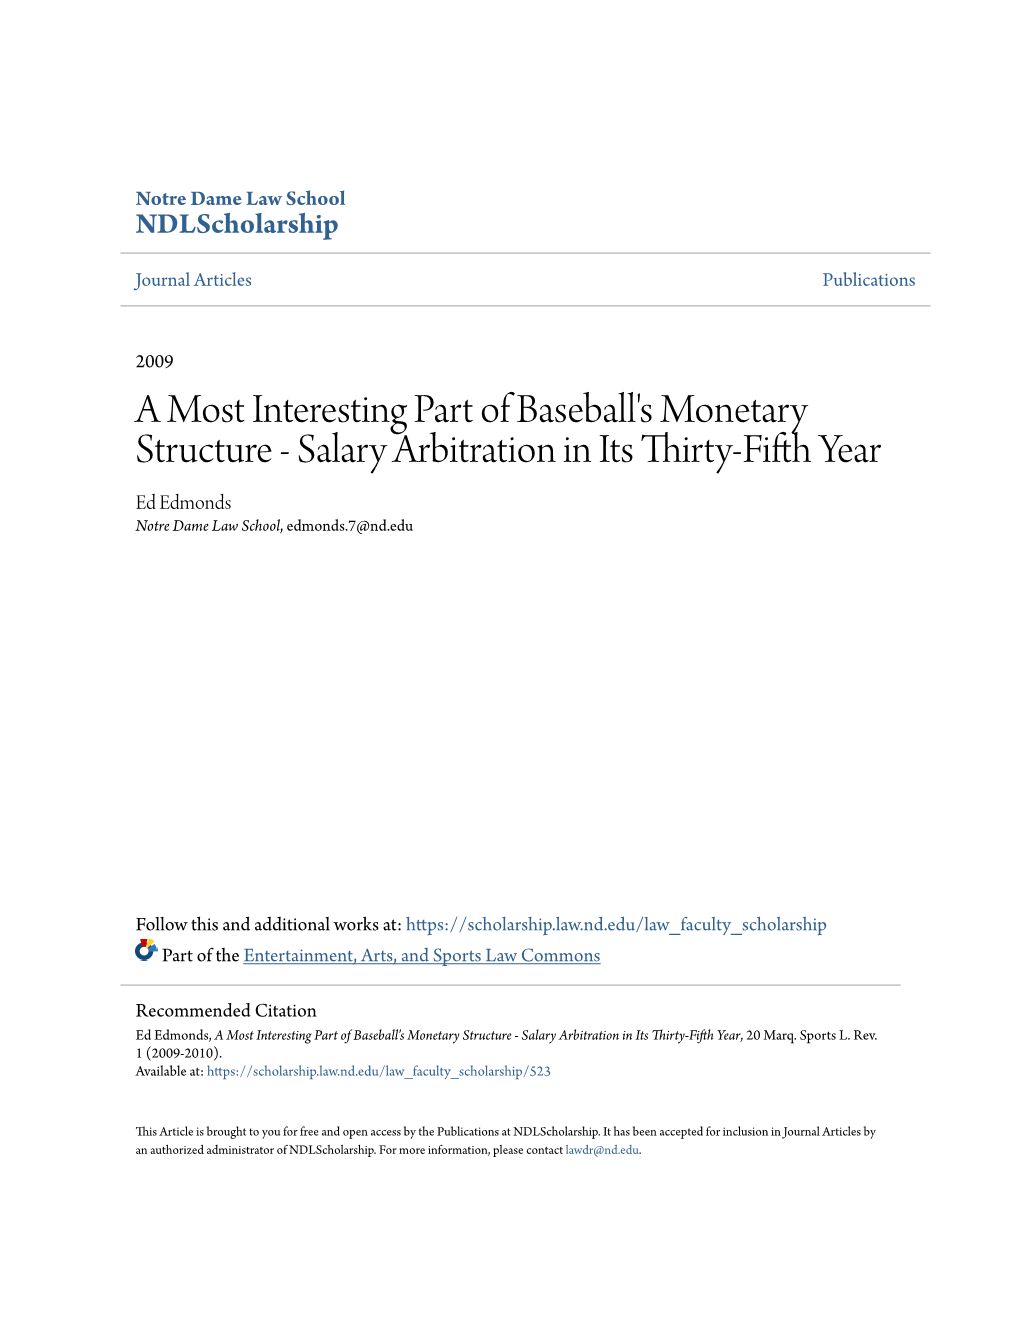 A Most Interesting Part of Baseball's Monetary Structure - Salary Arbitration in Its Thirty-Fifth Ey Ar Ed Edmonds Notre Dame Law School, Edmonds.7@Nd.Edu